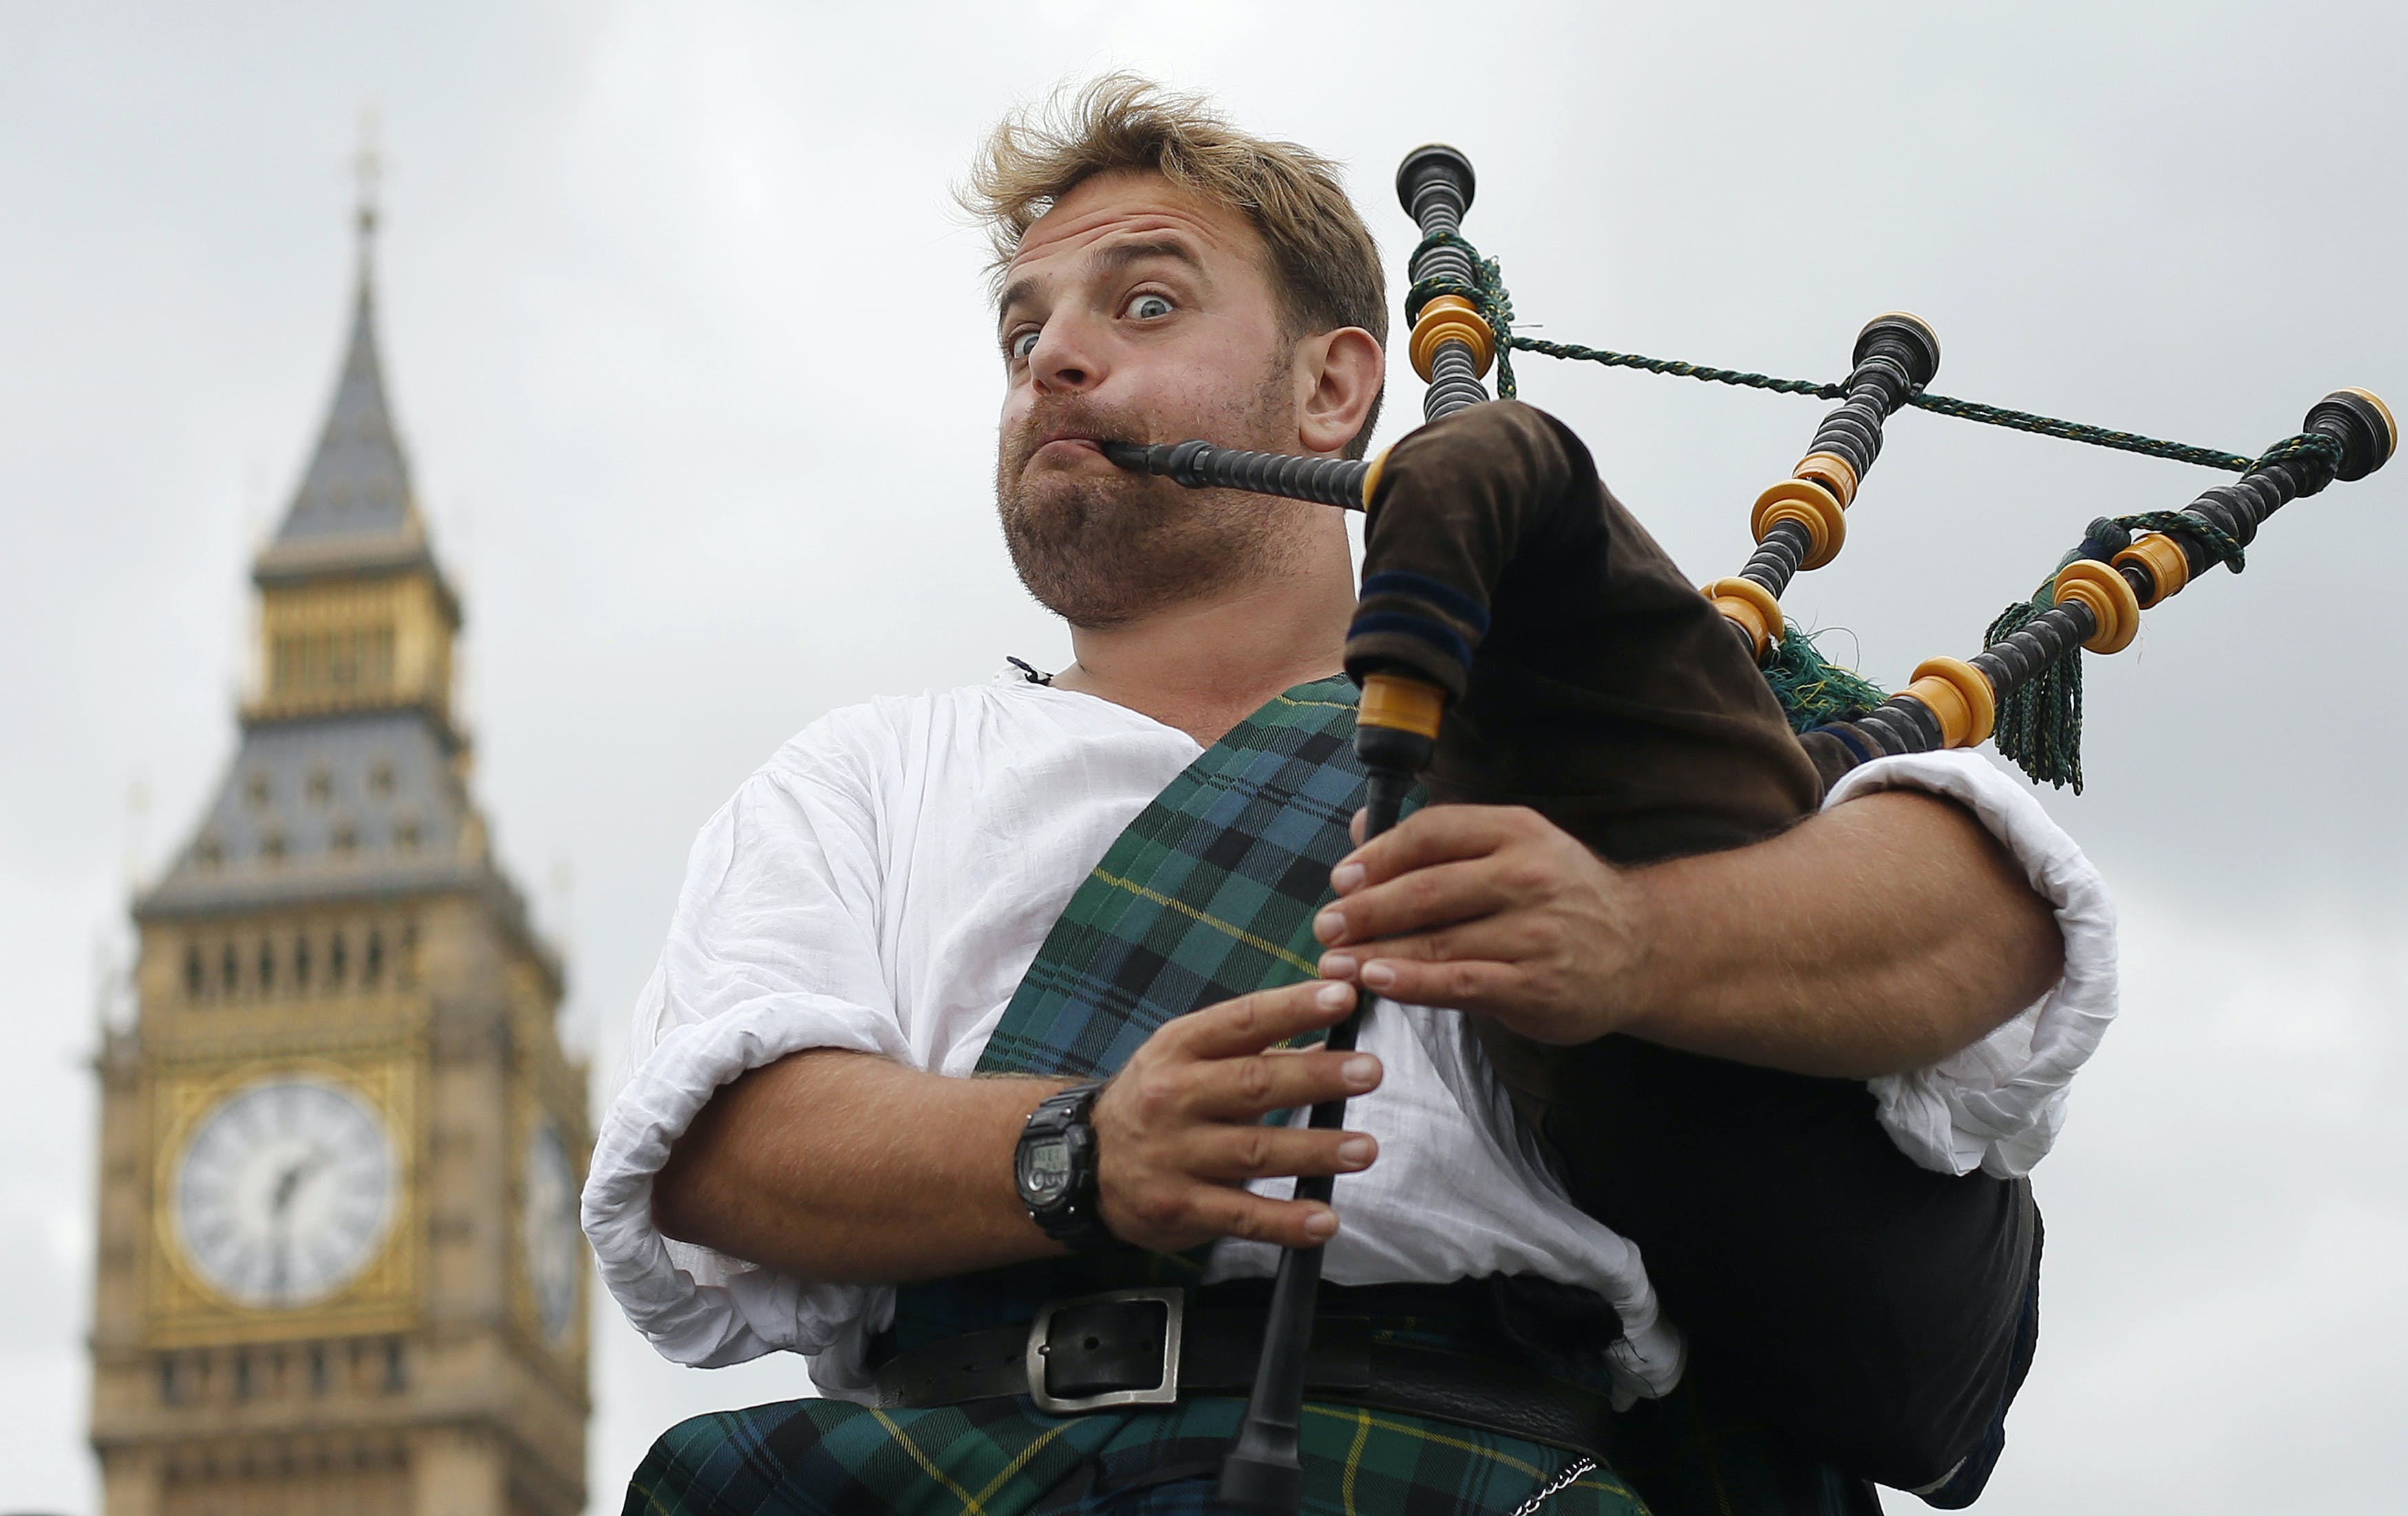 Bagpiper and busker David Whitney of Aberdeen, Scotland, plays the bagpipes near Big Ben and the Houses of Parliament in central London